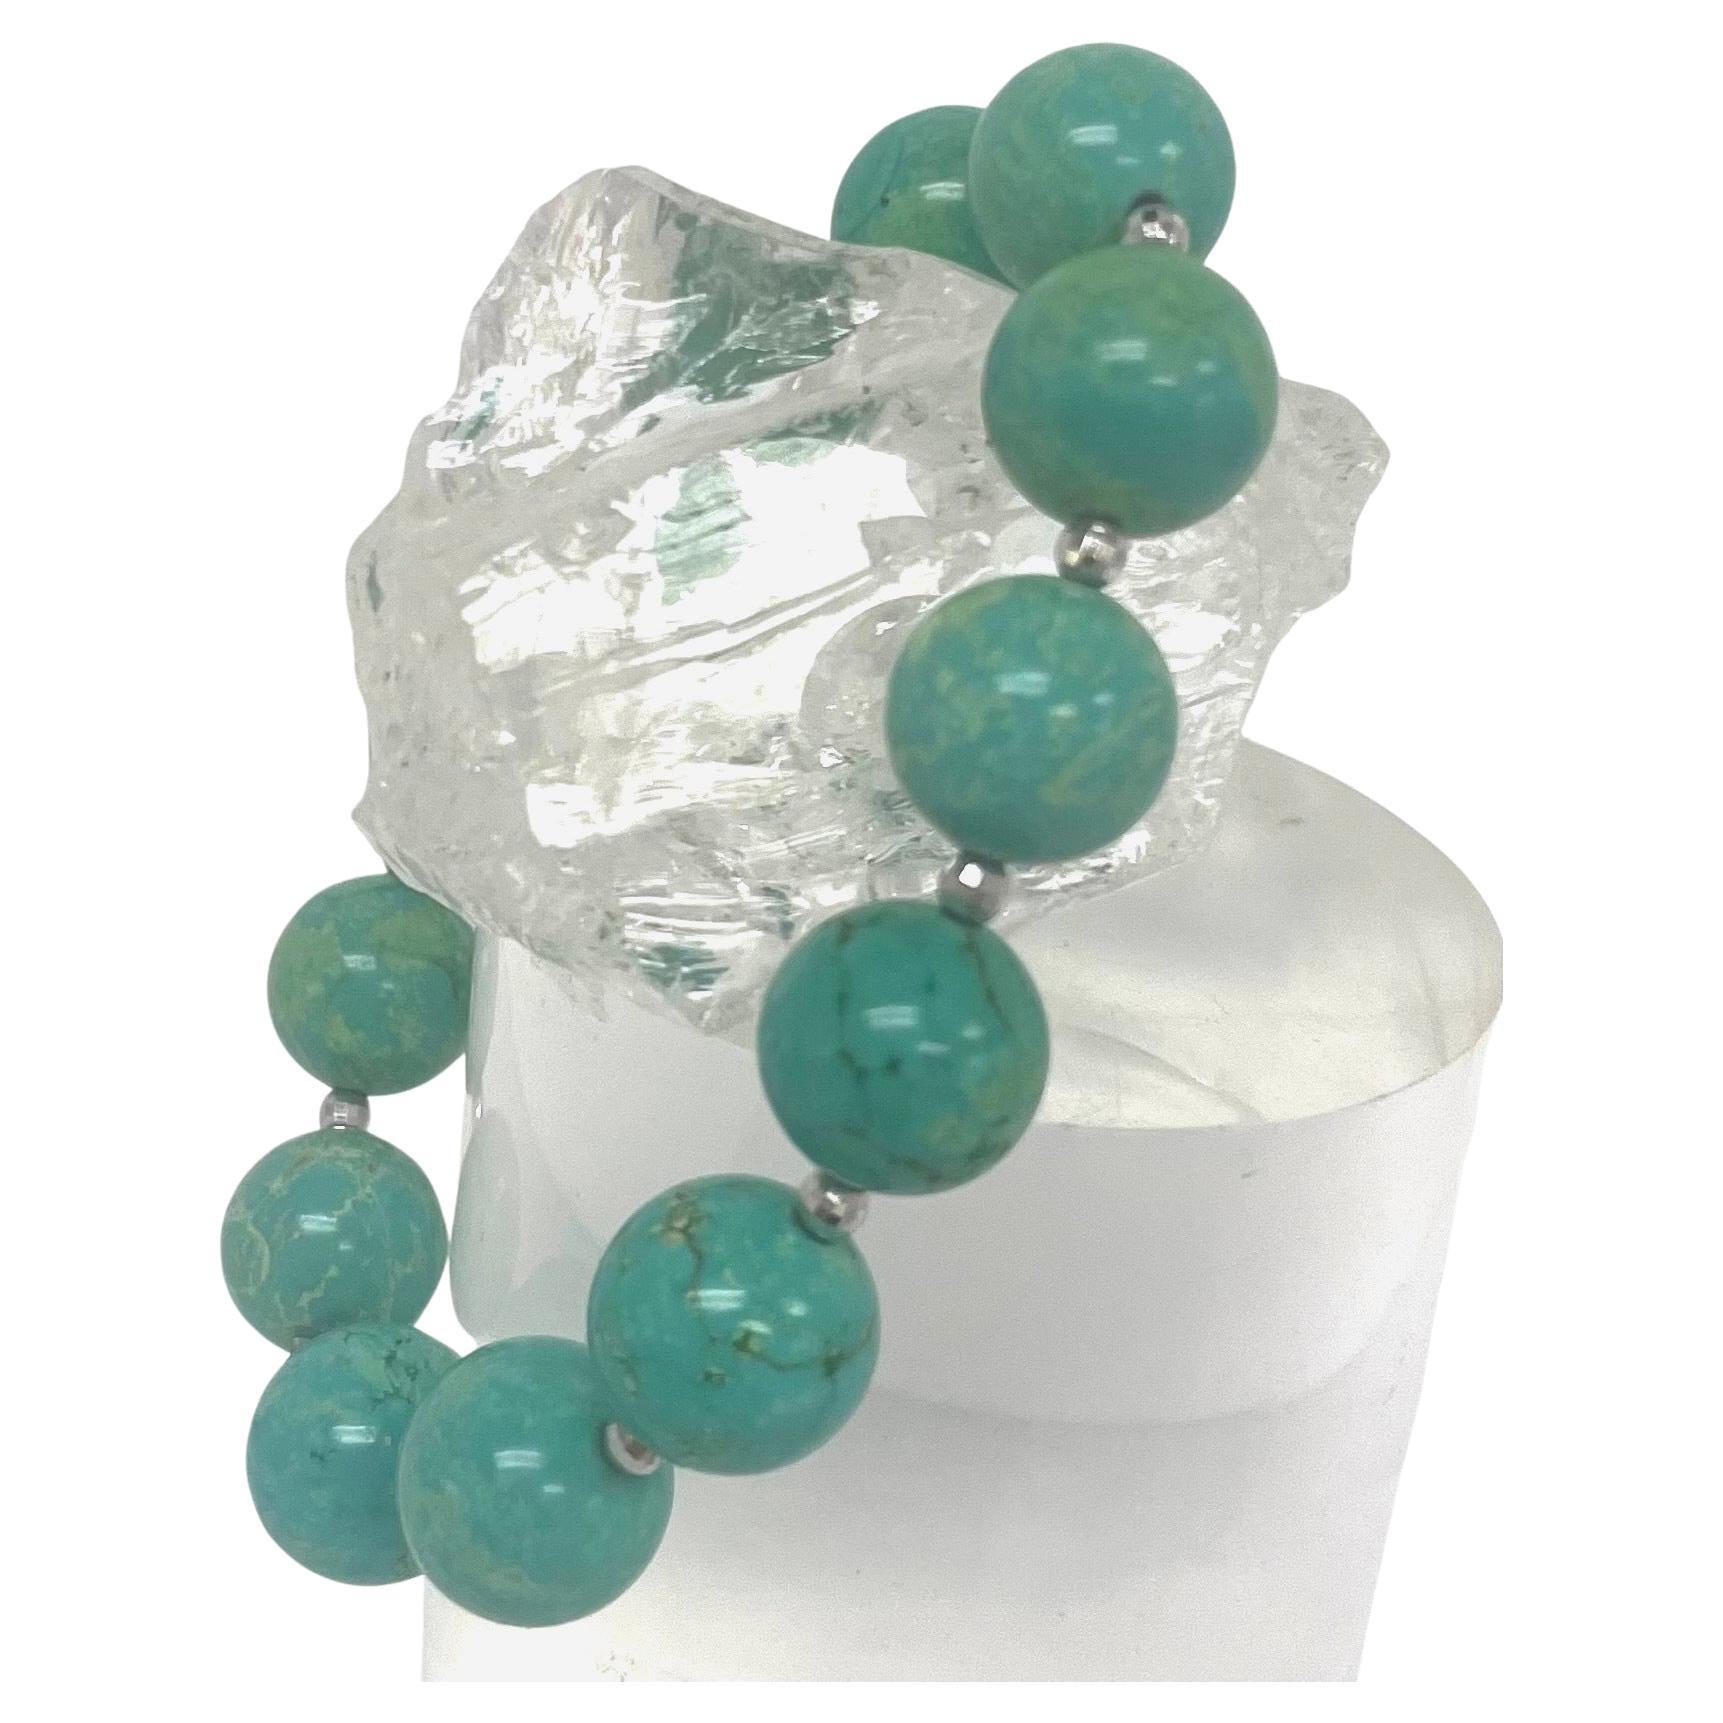 Description
Luscious green magnesite stretchy bracelet enhanced with 14k white gold faceted beads. Great for stacking. 
Item # B1275
Stack  it with item# B1269. (Sold separately).

Materials and Weight 
Green magnesite, 155cts, 13 pieces 12mm round